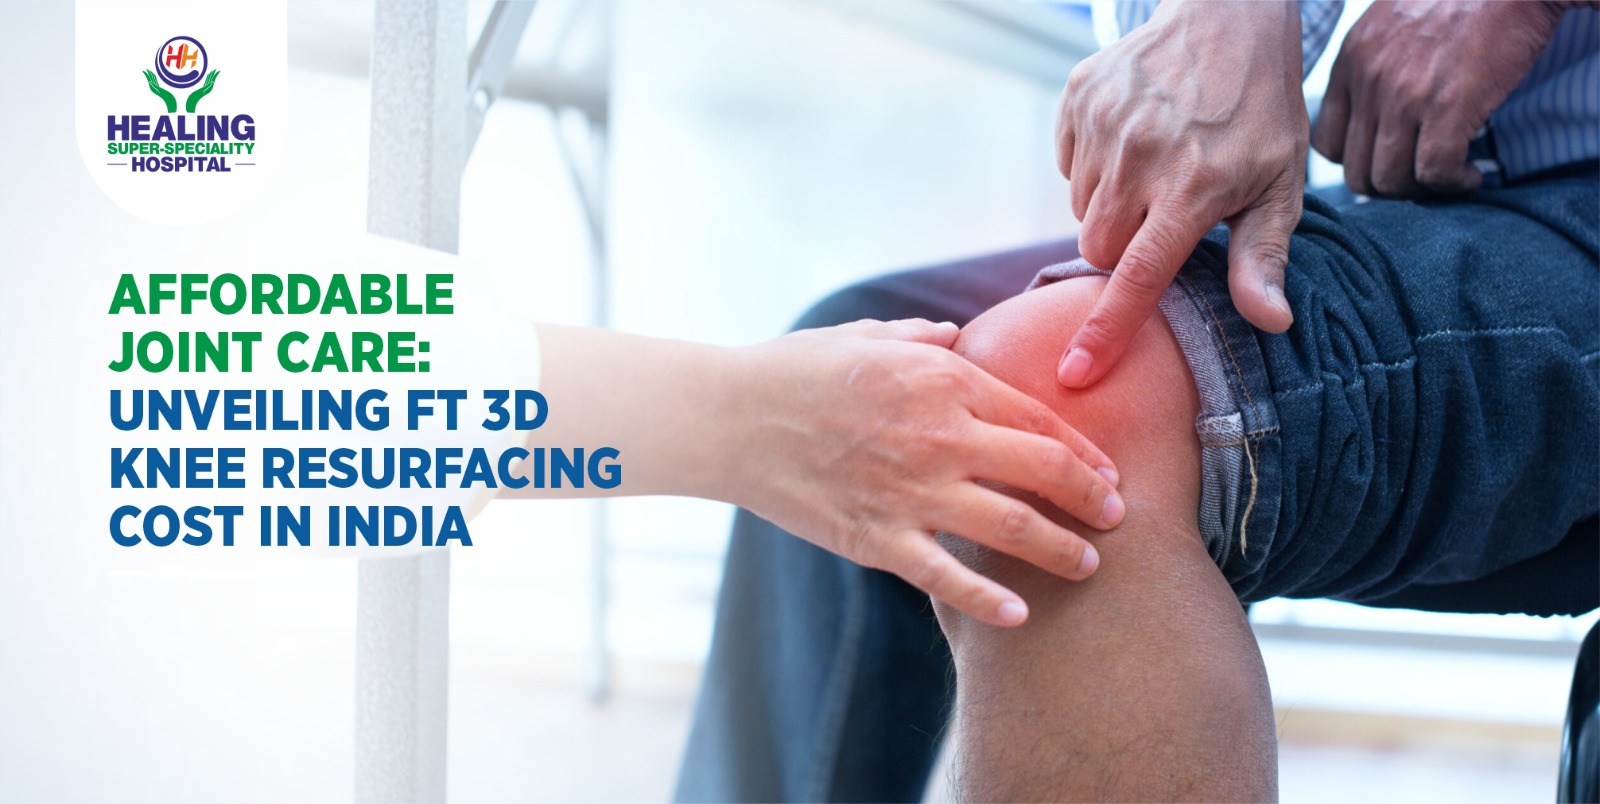 Affordable Joint Care: Unveiling FT 3D Knee Resurfacing Cost in India